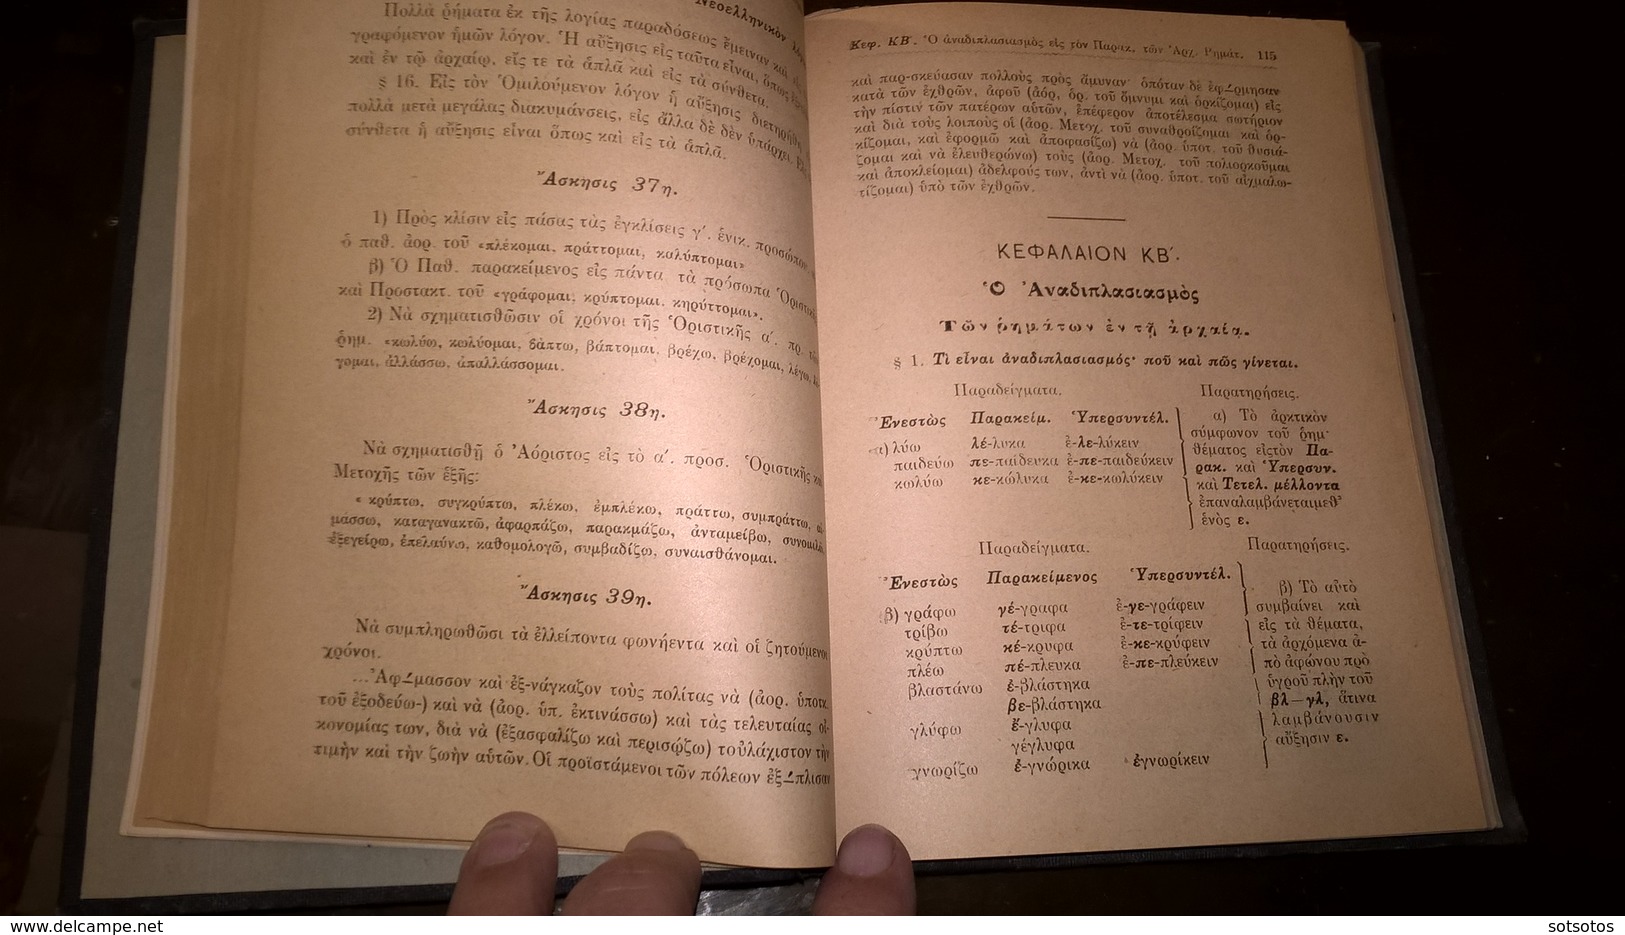 Greek Book: The ART of WRITING, Part 1. The technic of the Greek Language – Orthographic System (1925) - 350 pages